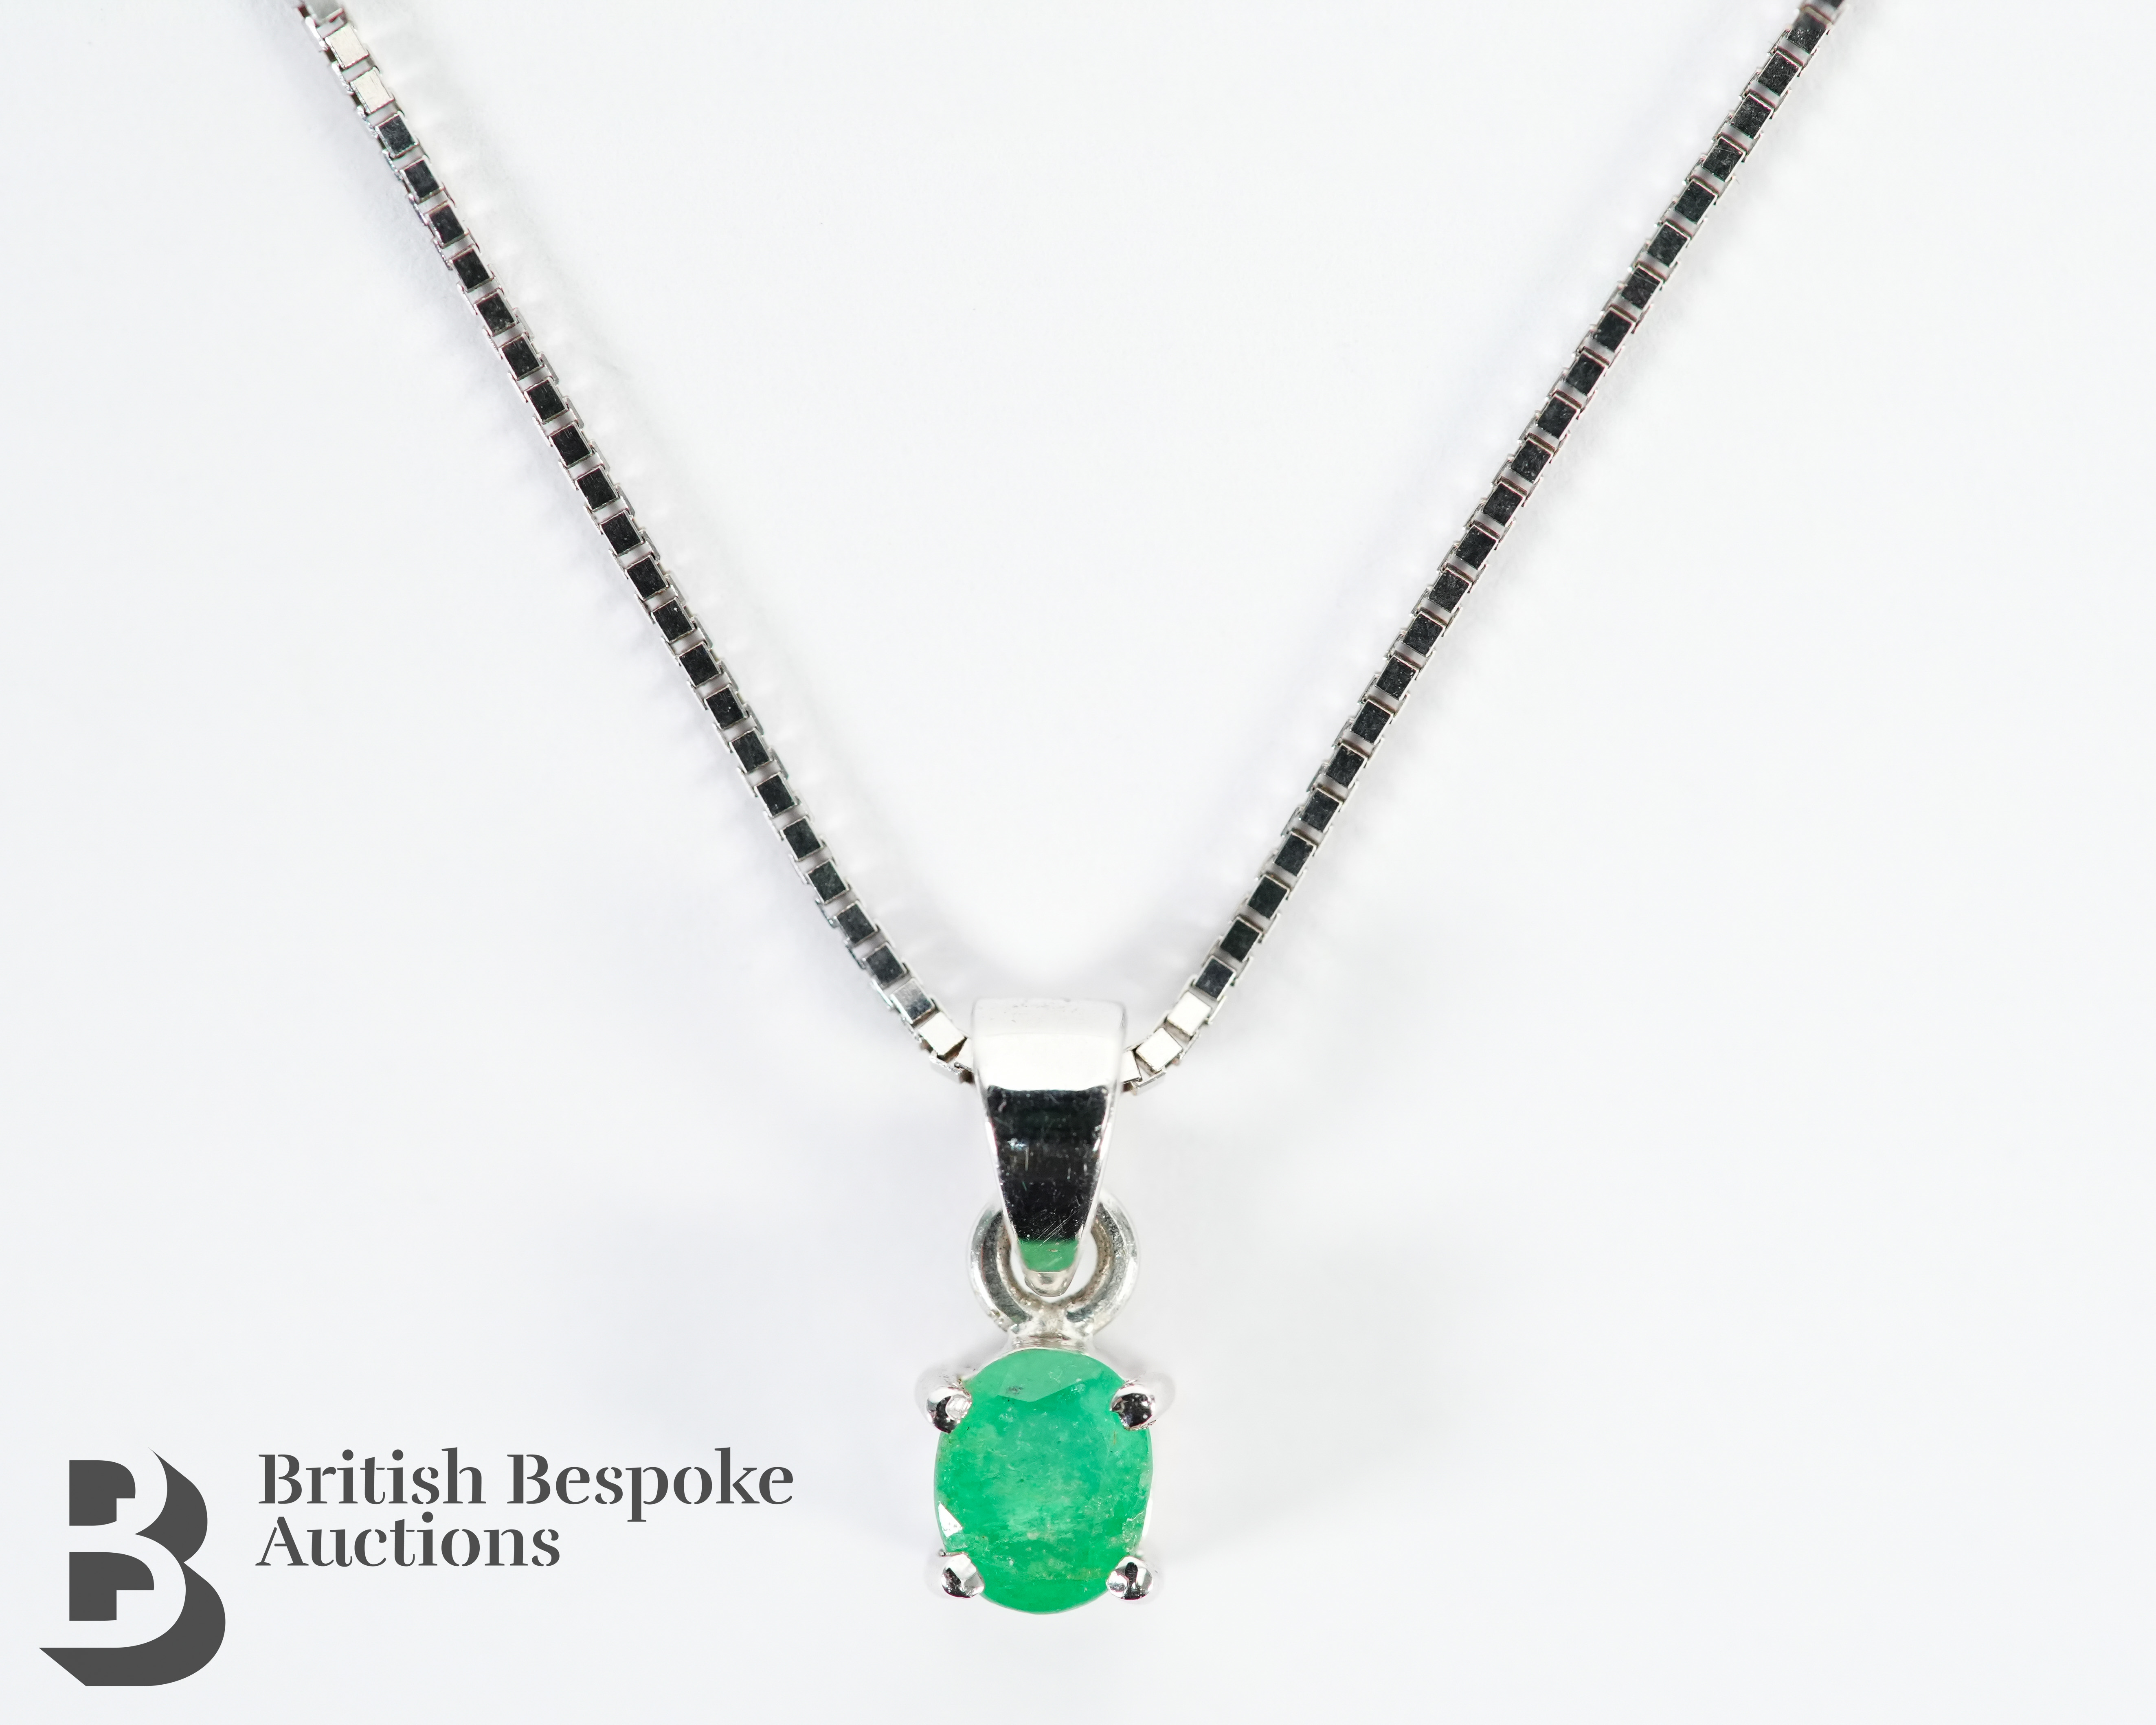 18ct White Gold and Emerald Pendant and Chain - Image 3 of 3